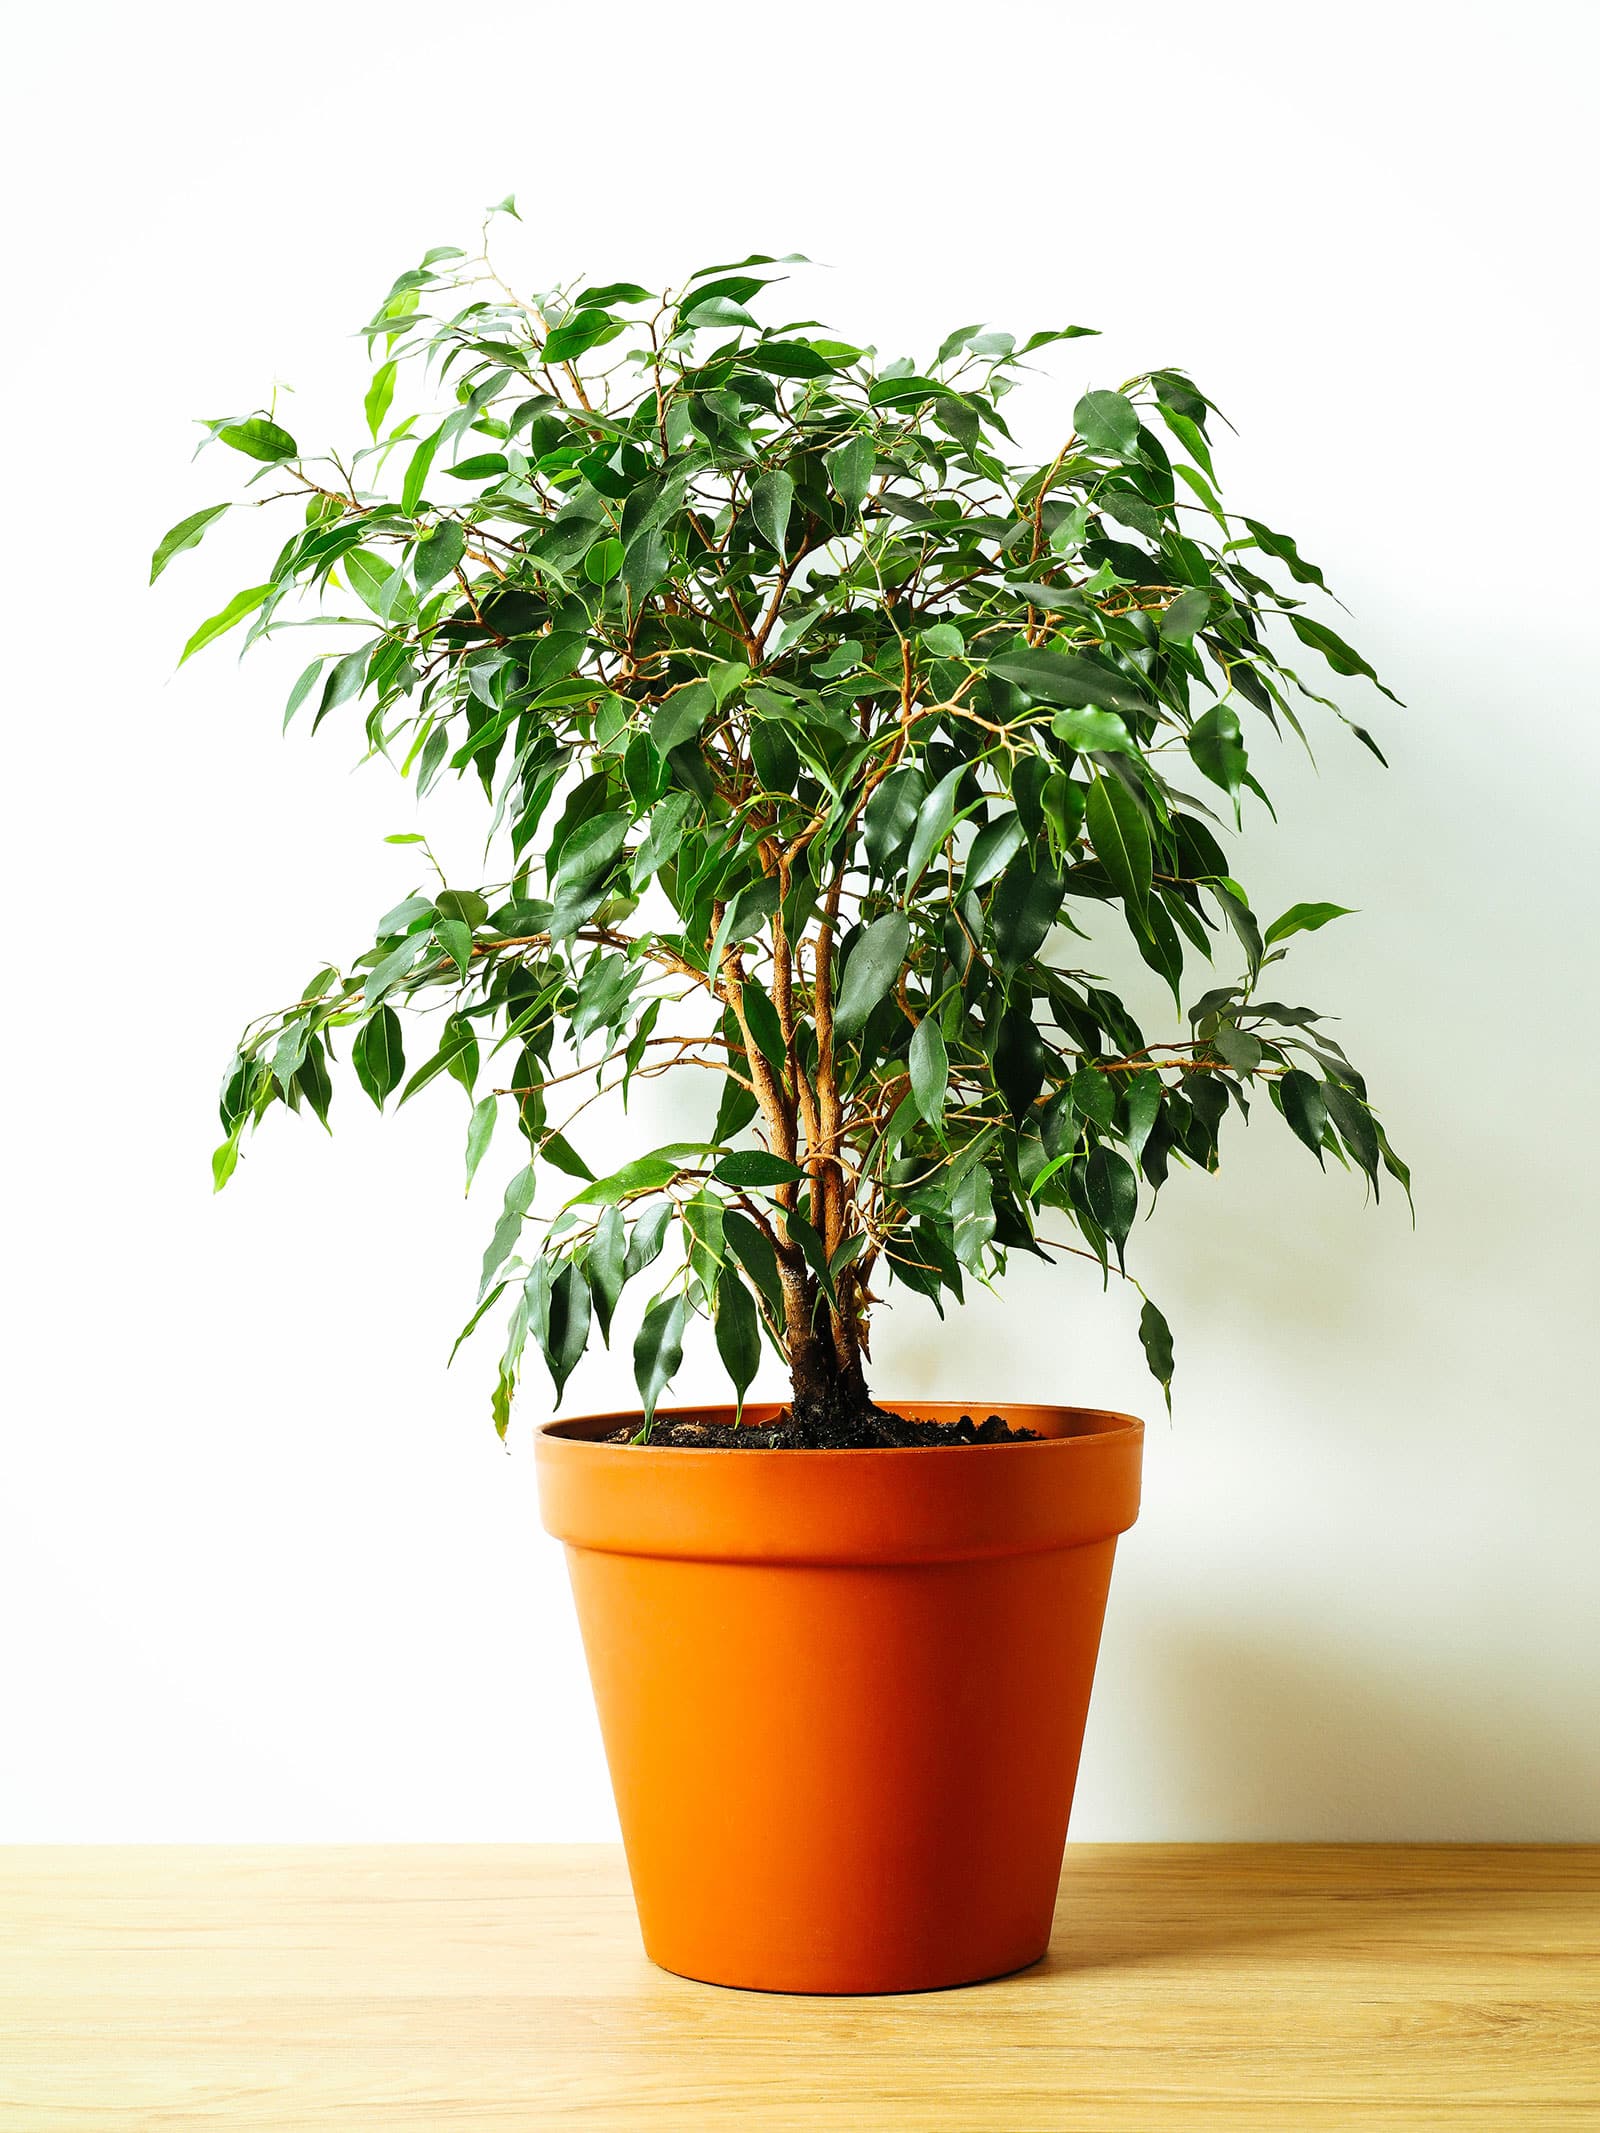 A large Ficus benjamina (weeping fig) tree in a terracotta pot, placed on a wooden floor against a white wall